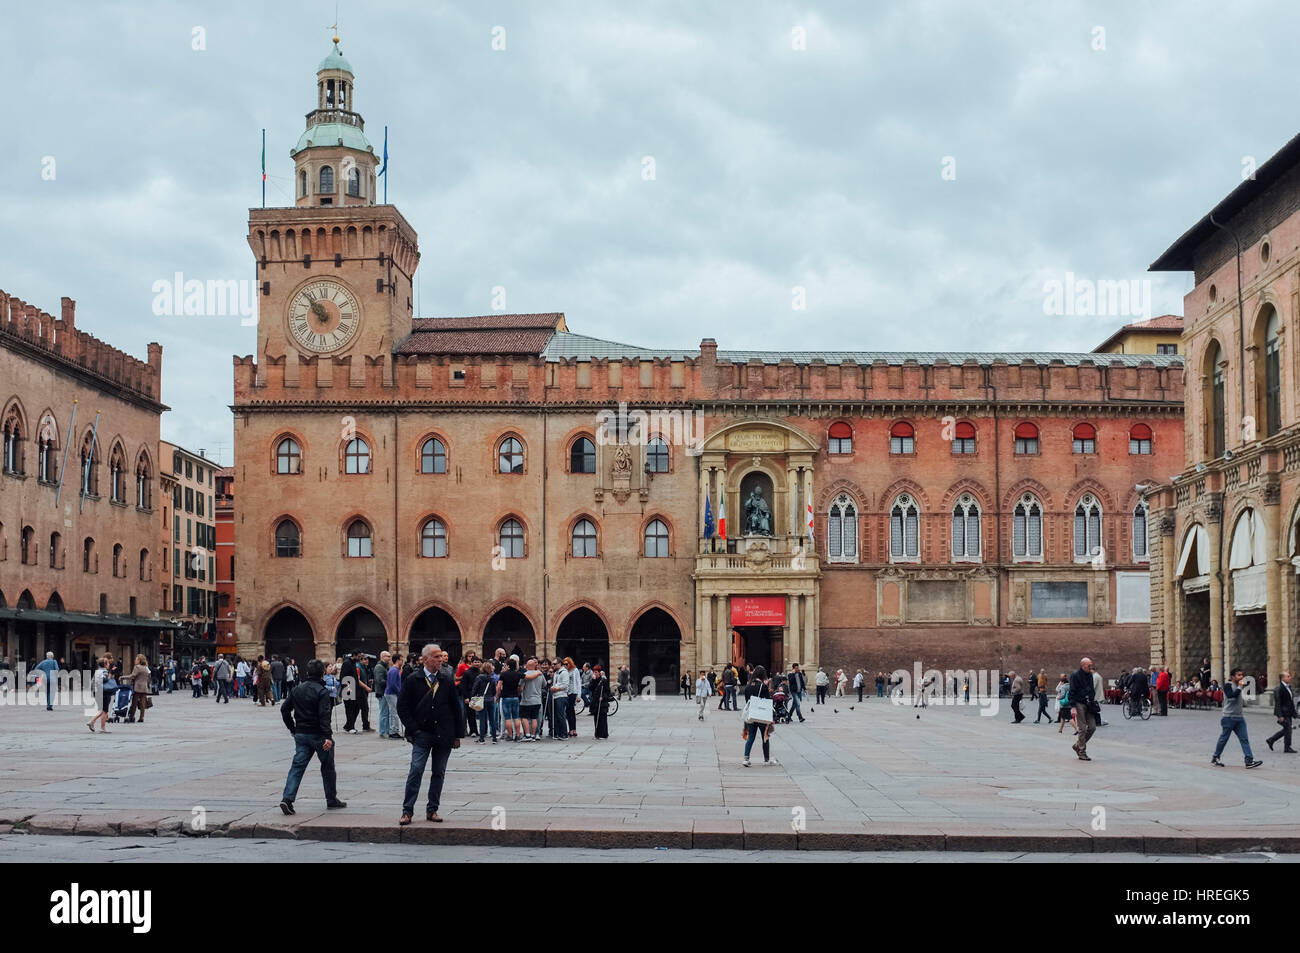 Palazzo d'Accursio or also known as the Palazzo Comunale is home to the Civic Art Collection, which is located on the Piazza Maggiore in Bologna, Ital Stock Photo